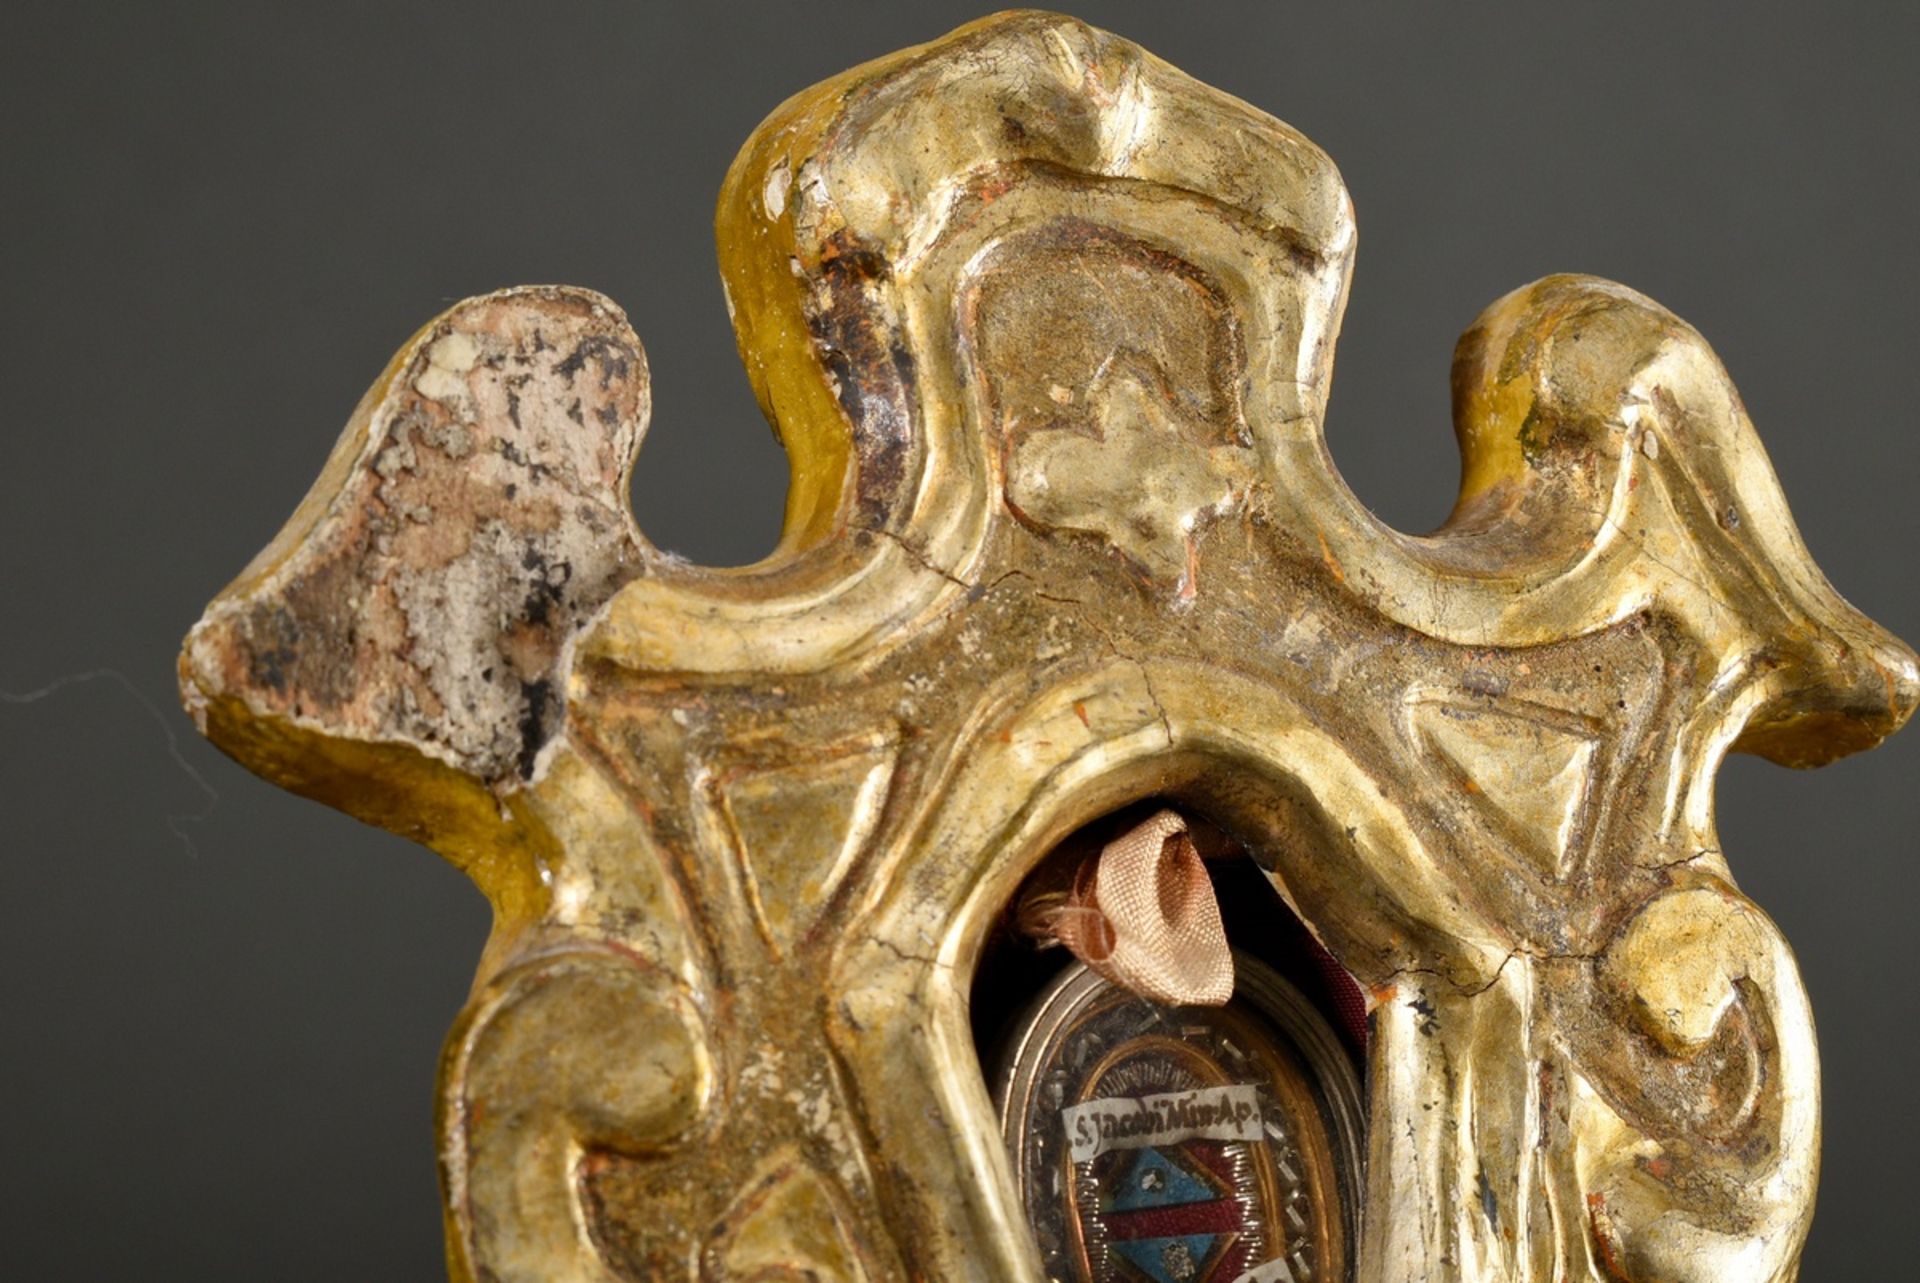 Baroque reliquary with small monastery work "S. Jacobi..." and S. Philippi Ap.", 18th c., carved an - Image 4 of 5